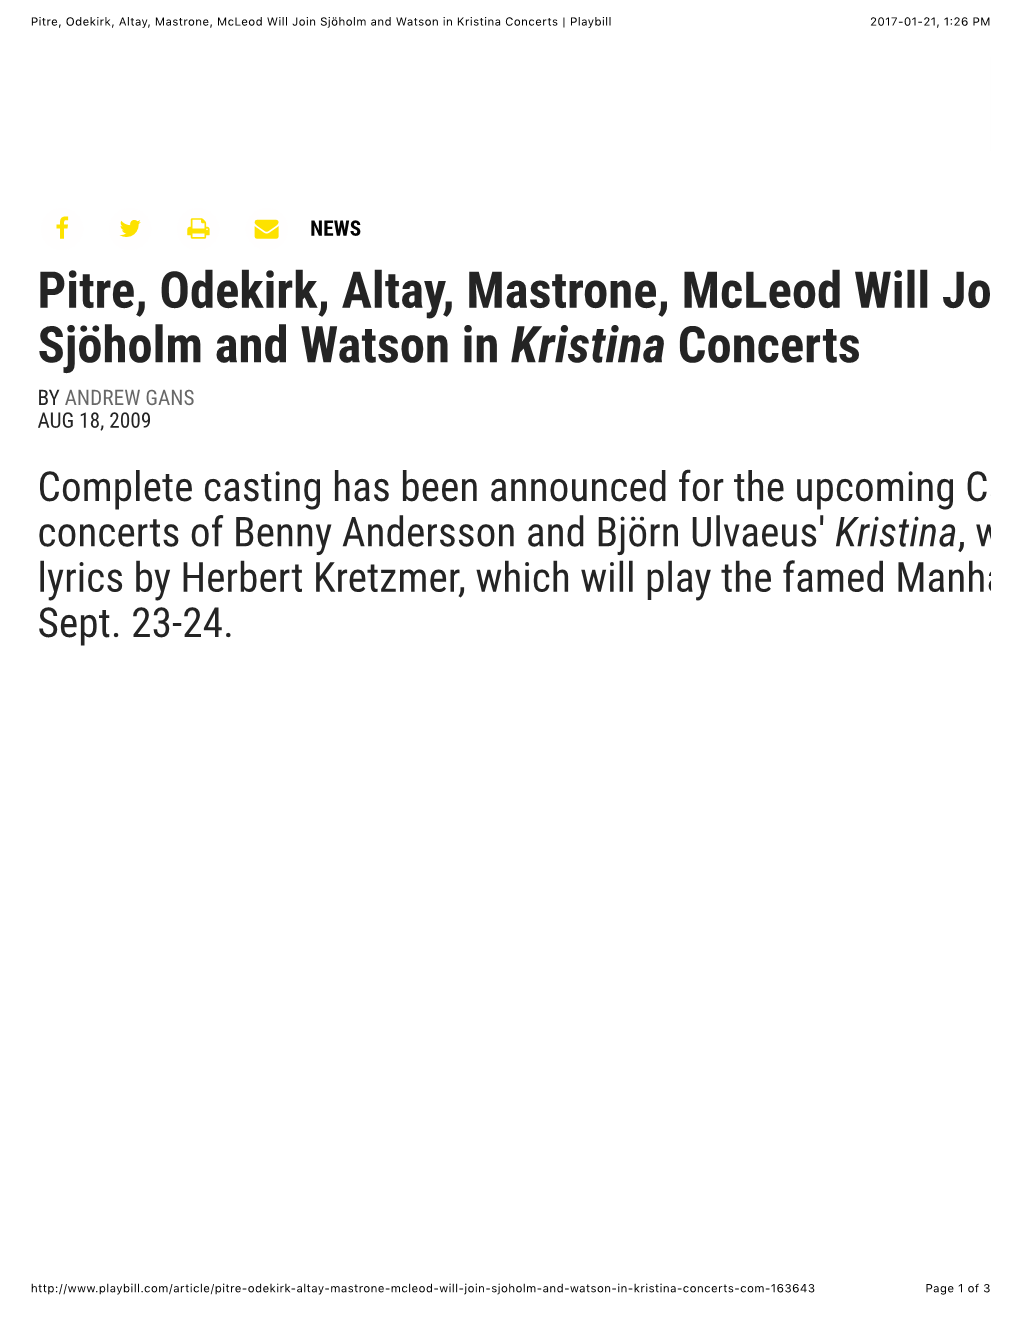 Pitre, Odekirk, Altay, Mastrone, Mcleod Will Join Sjöholm and Watson in Kristina Concerts | Playbill 2017-01-21, 1�26 PM